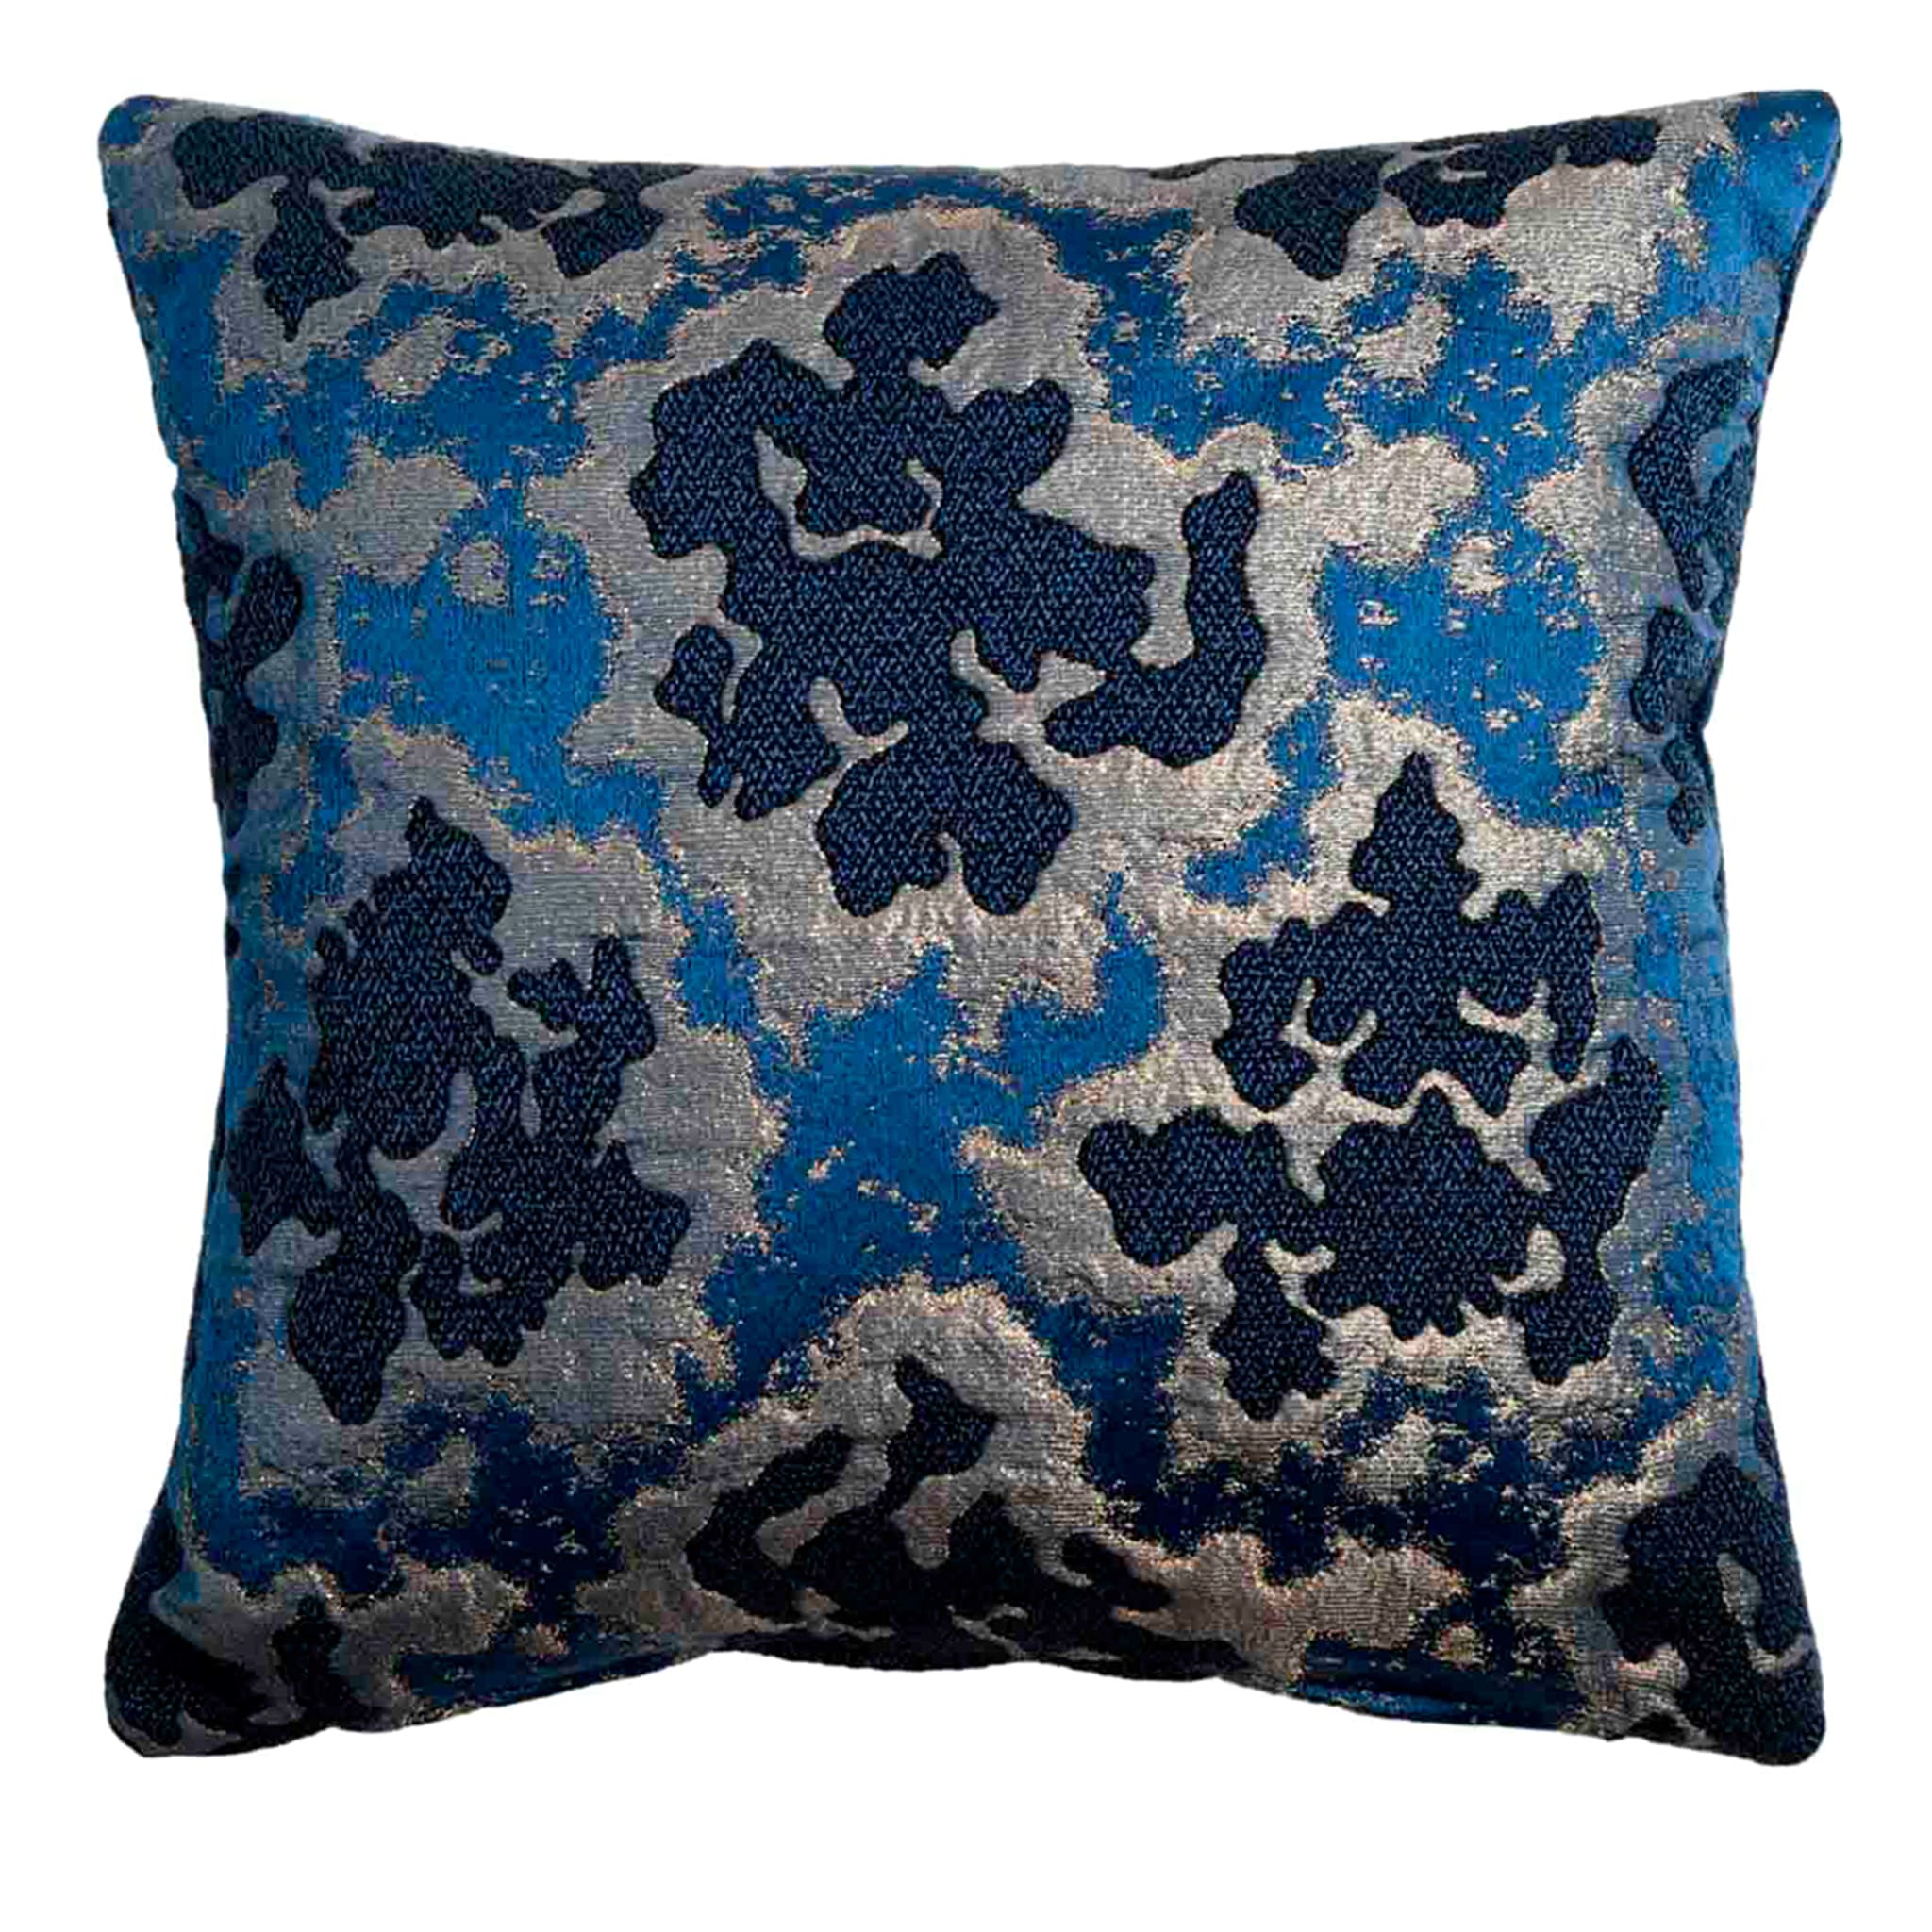 Carrè Patterned Blue and Silvery Square Cushion - Main view